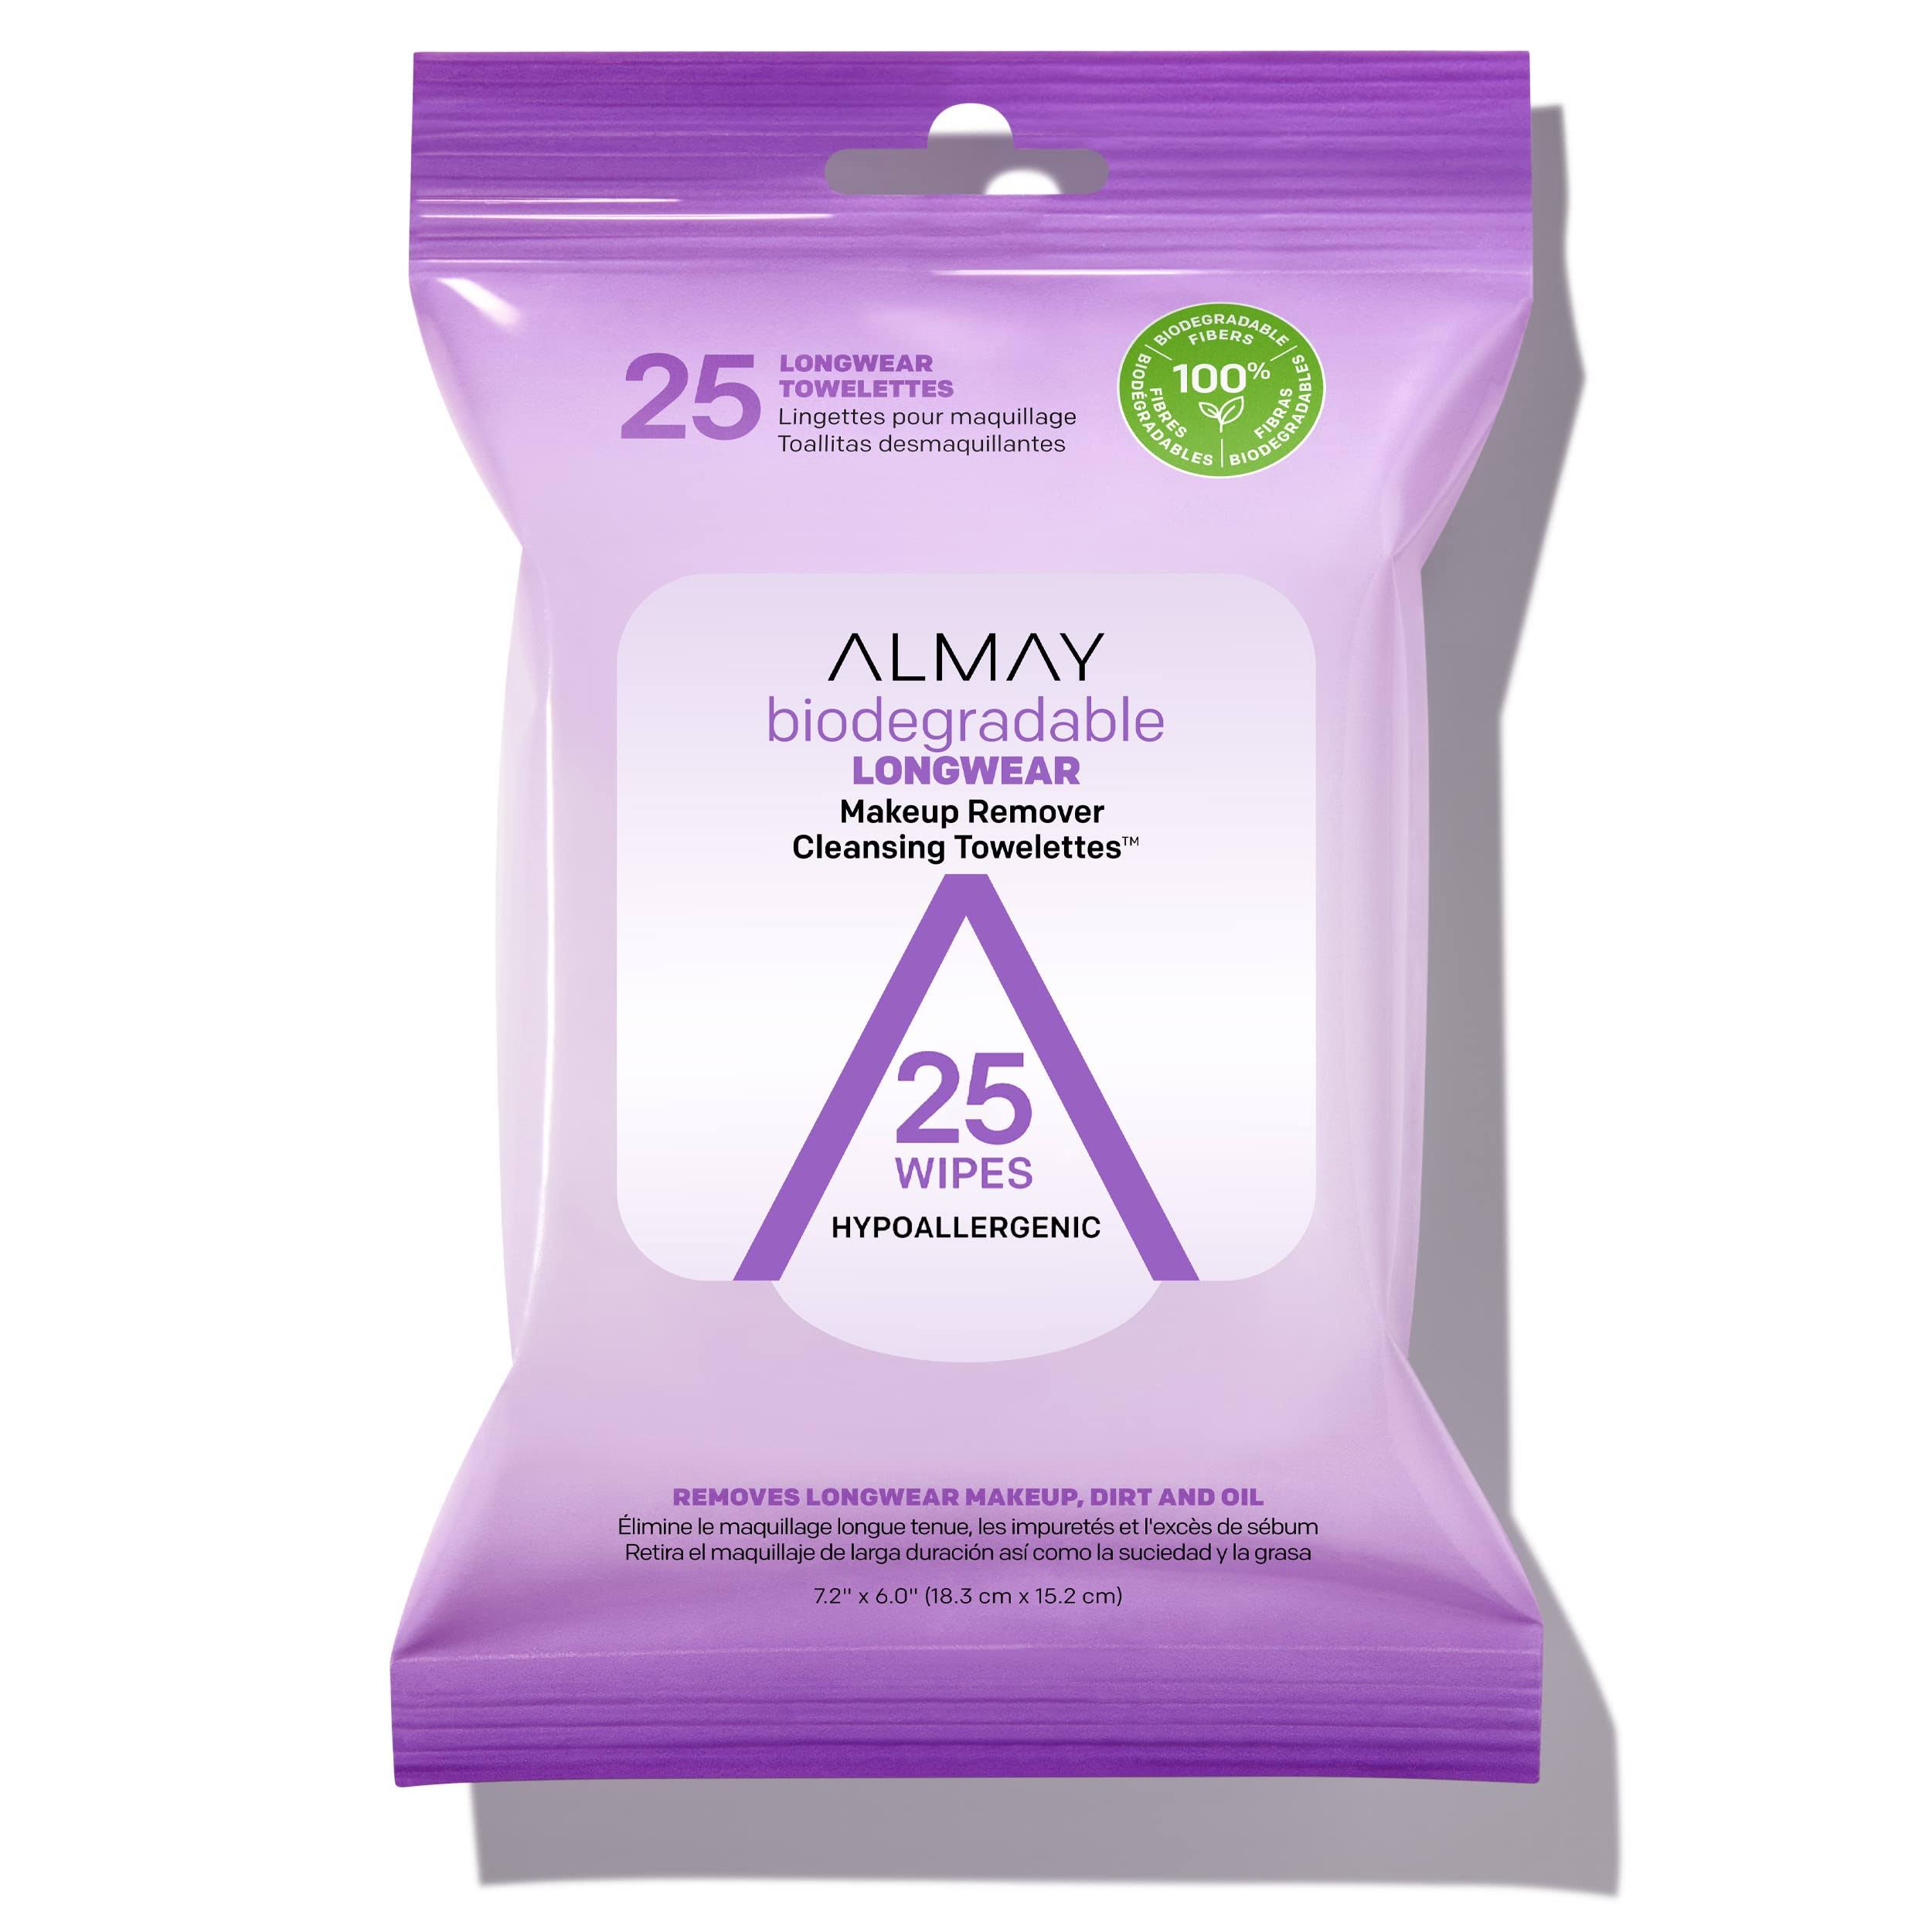 Almay Cleansing Towelettes, Makeup Remover, Longwear - 25 wipes